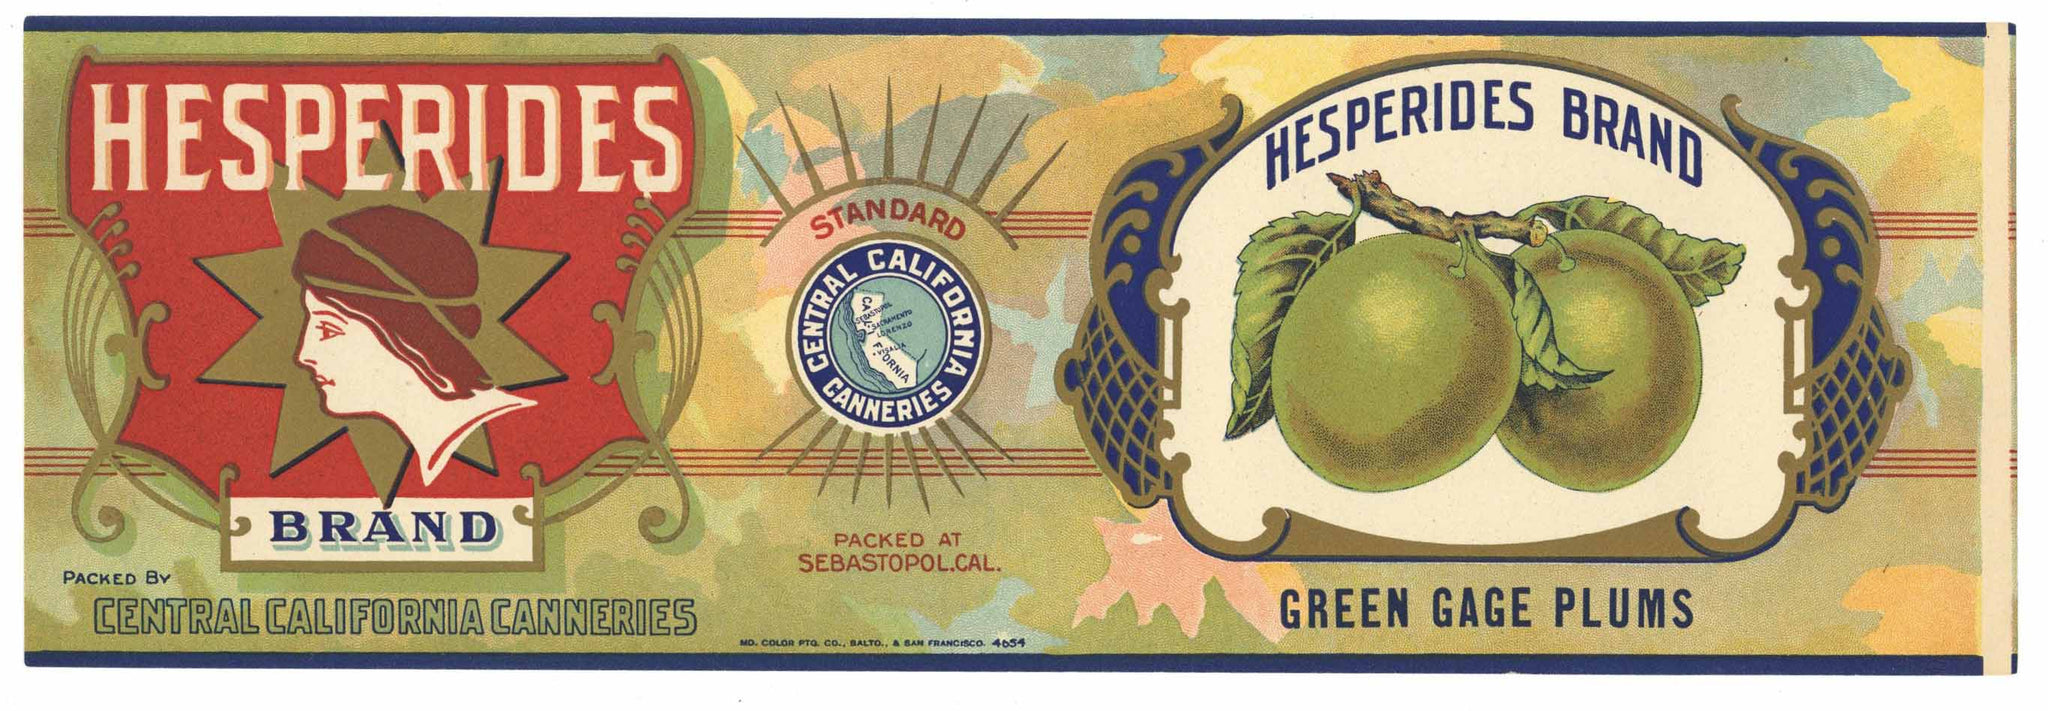 Hesperides Brand Vintage Green Cage Plums Can Label